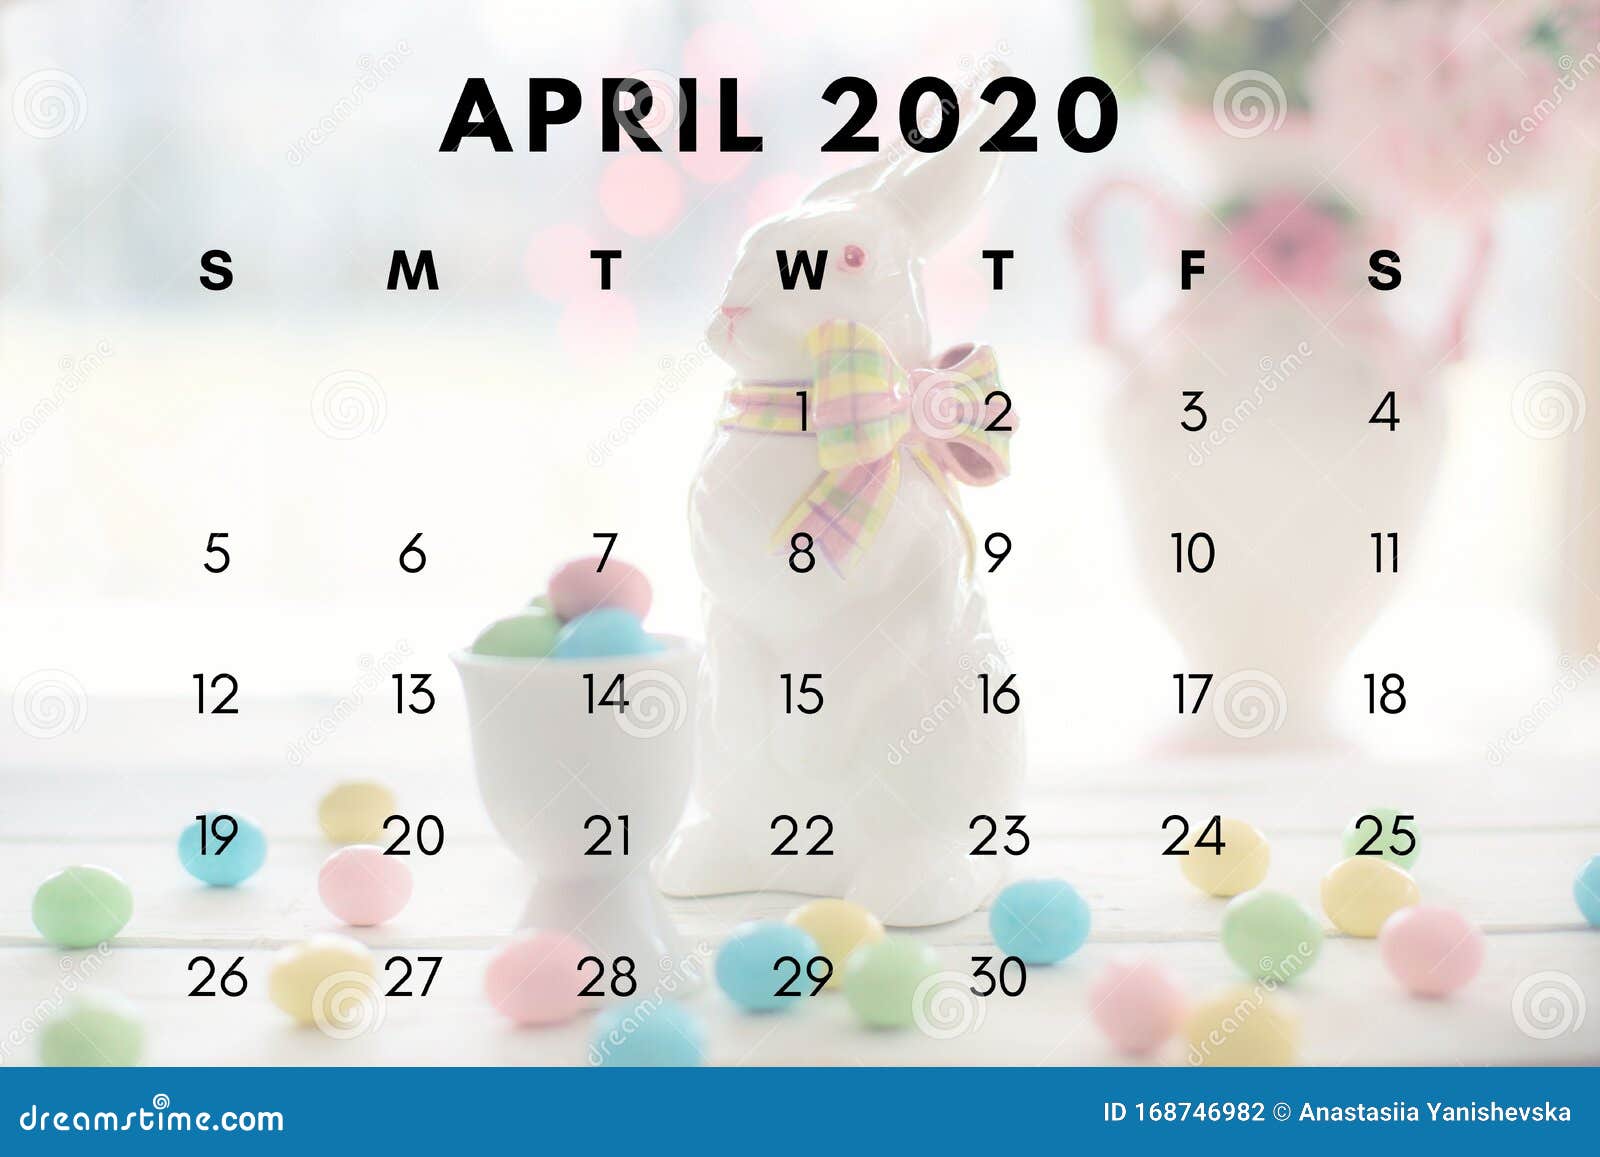 April 2020 Monthly Calendar Wallpaper Stock Photo - Image of ...